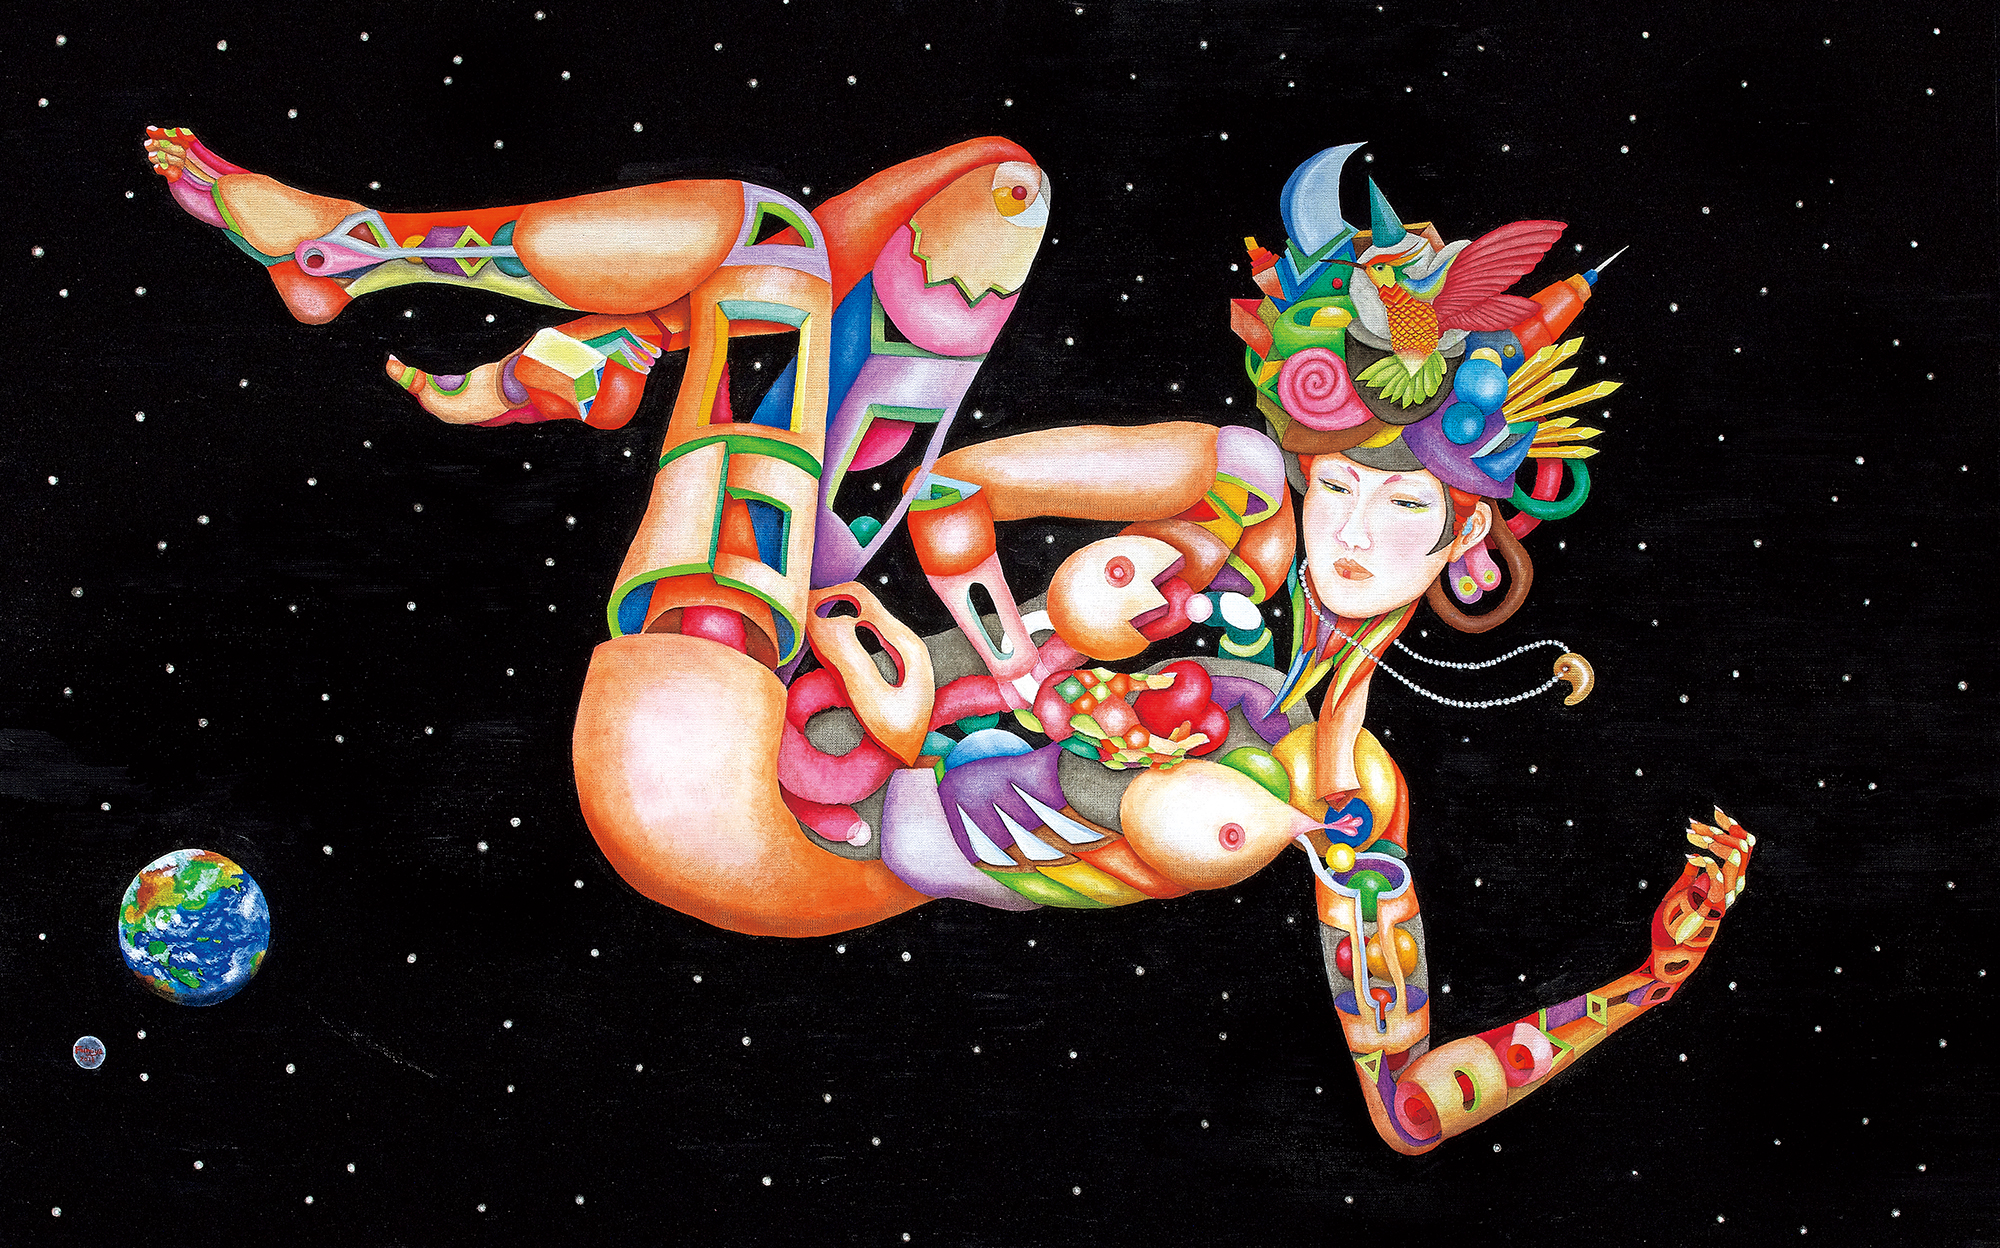 《AI Girl in Space》2018年　71.5×115.5cm　油彩、キャンバス